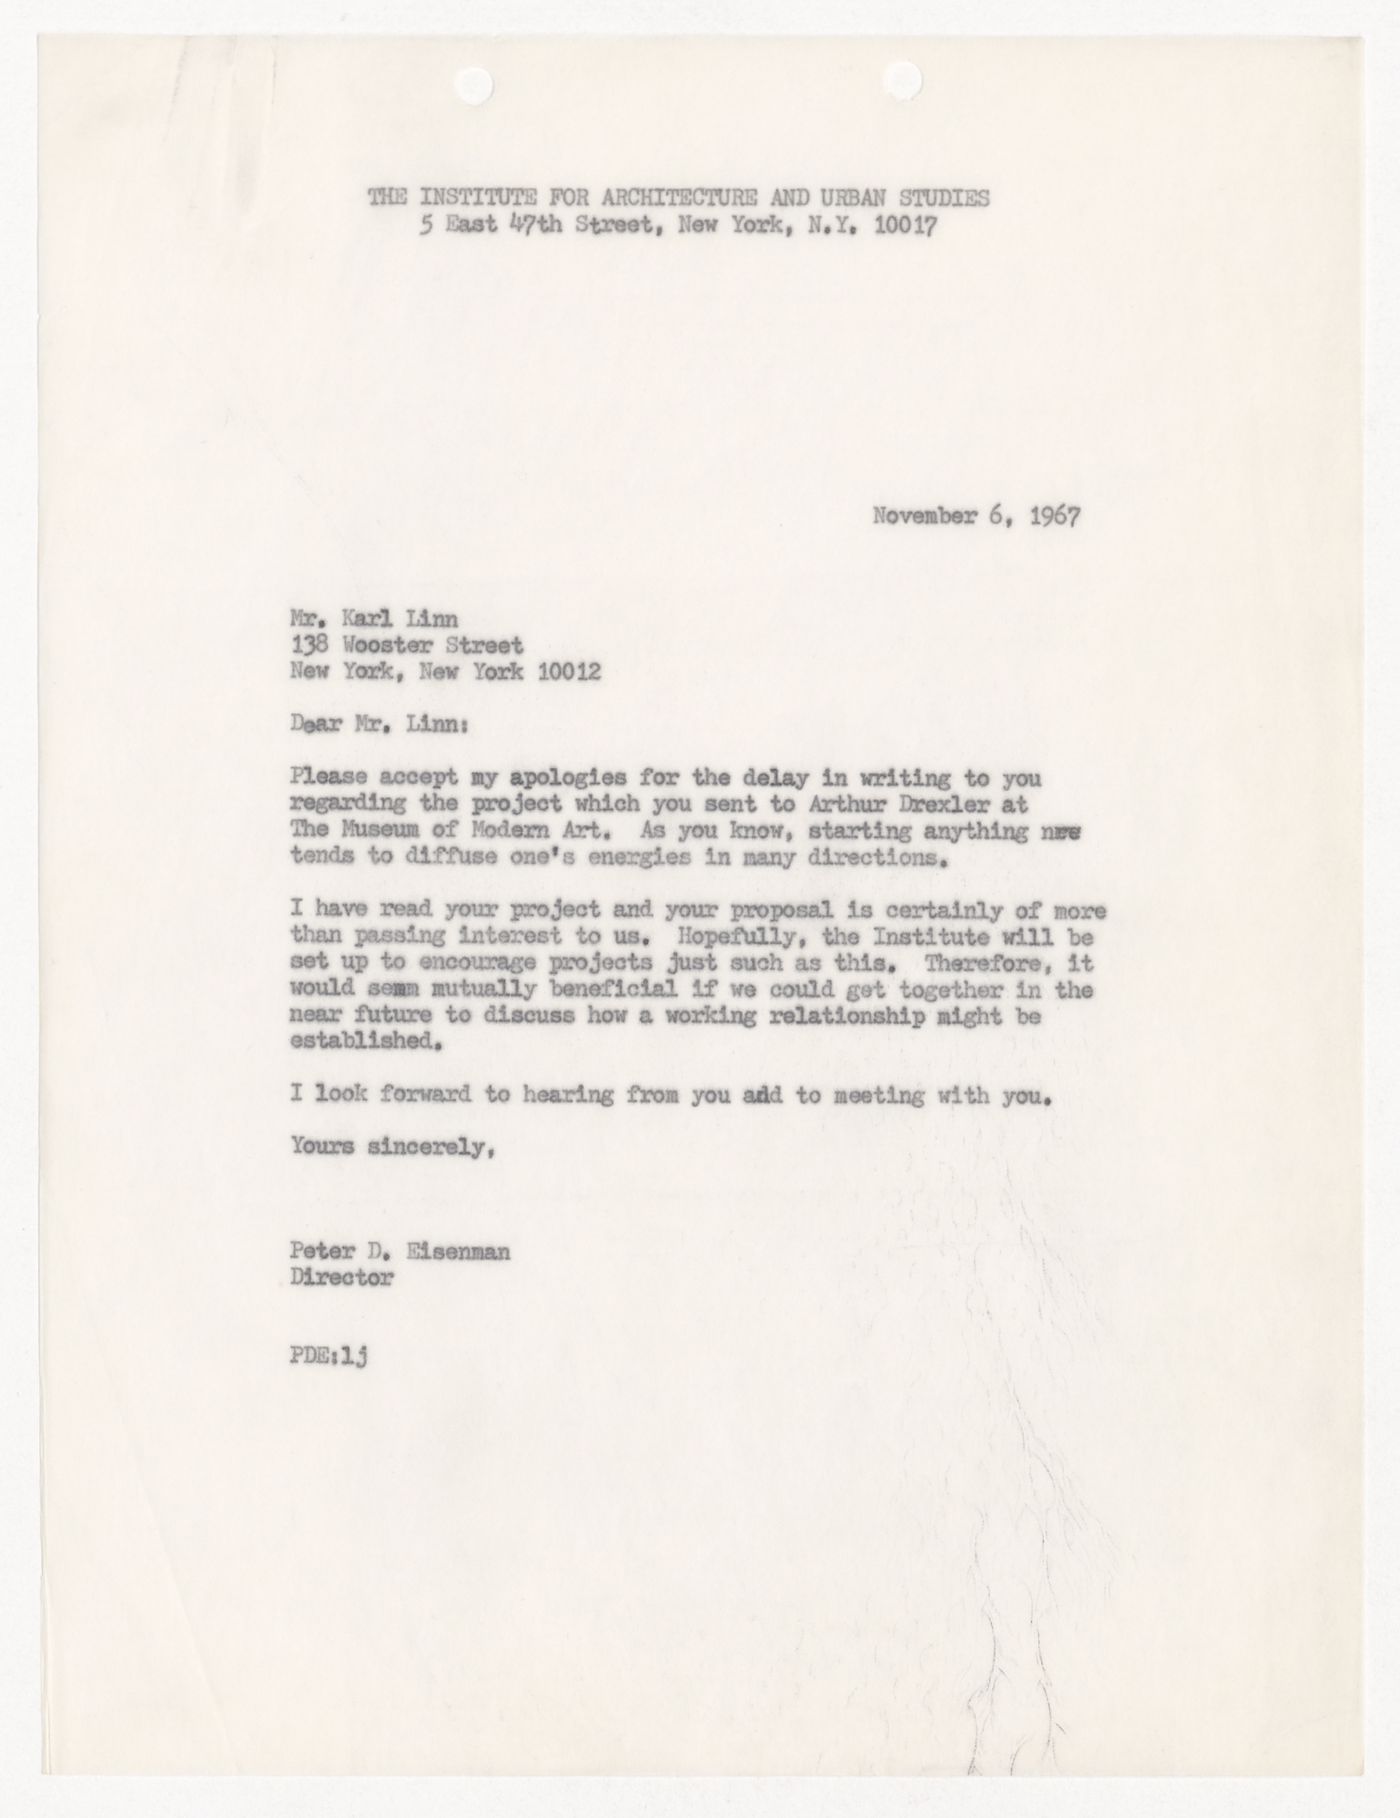 Letter from Peter D. Eisenman to Karl Linn about IAUS support for Linn's project